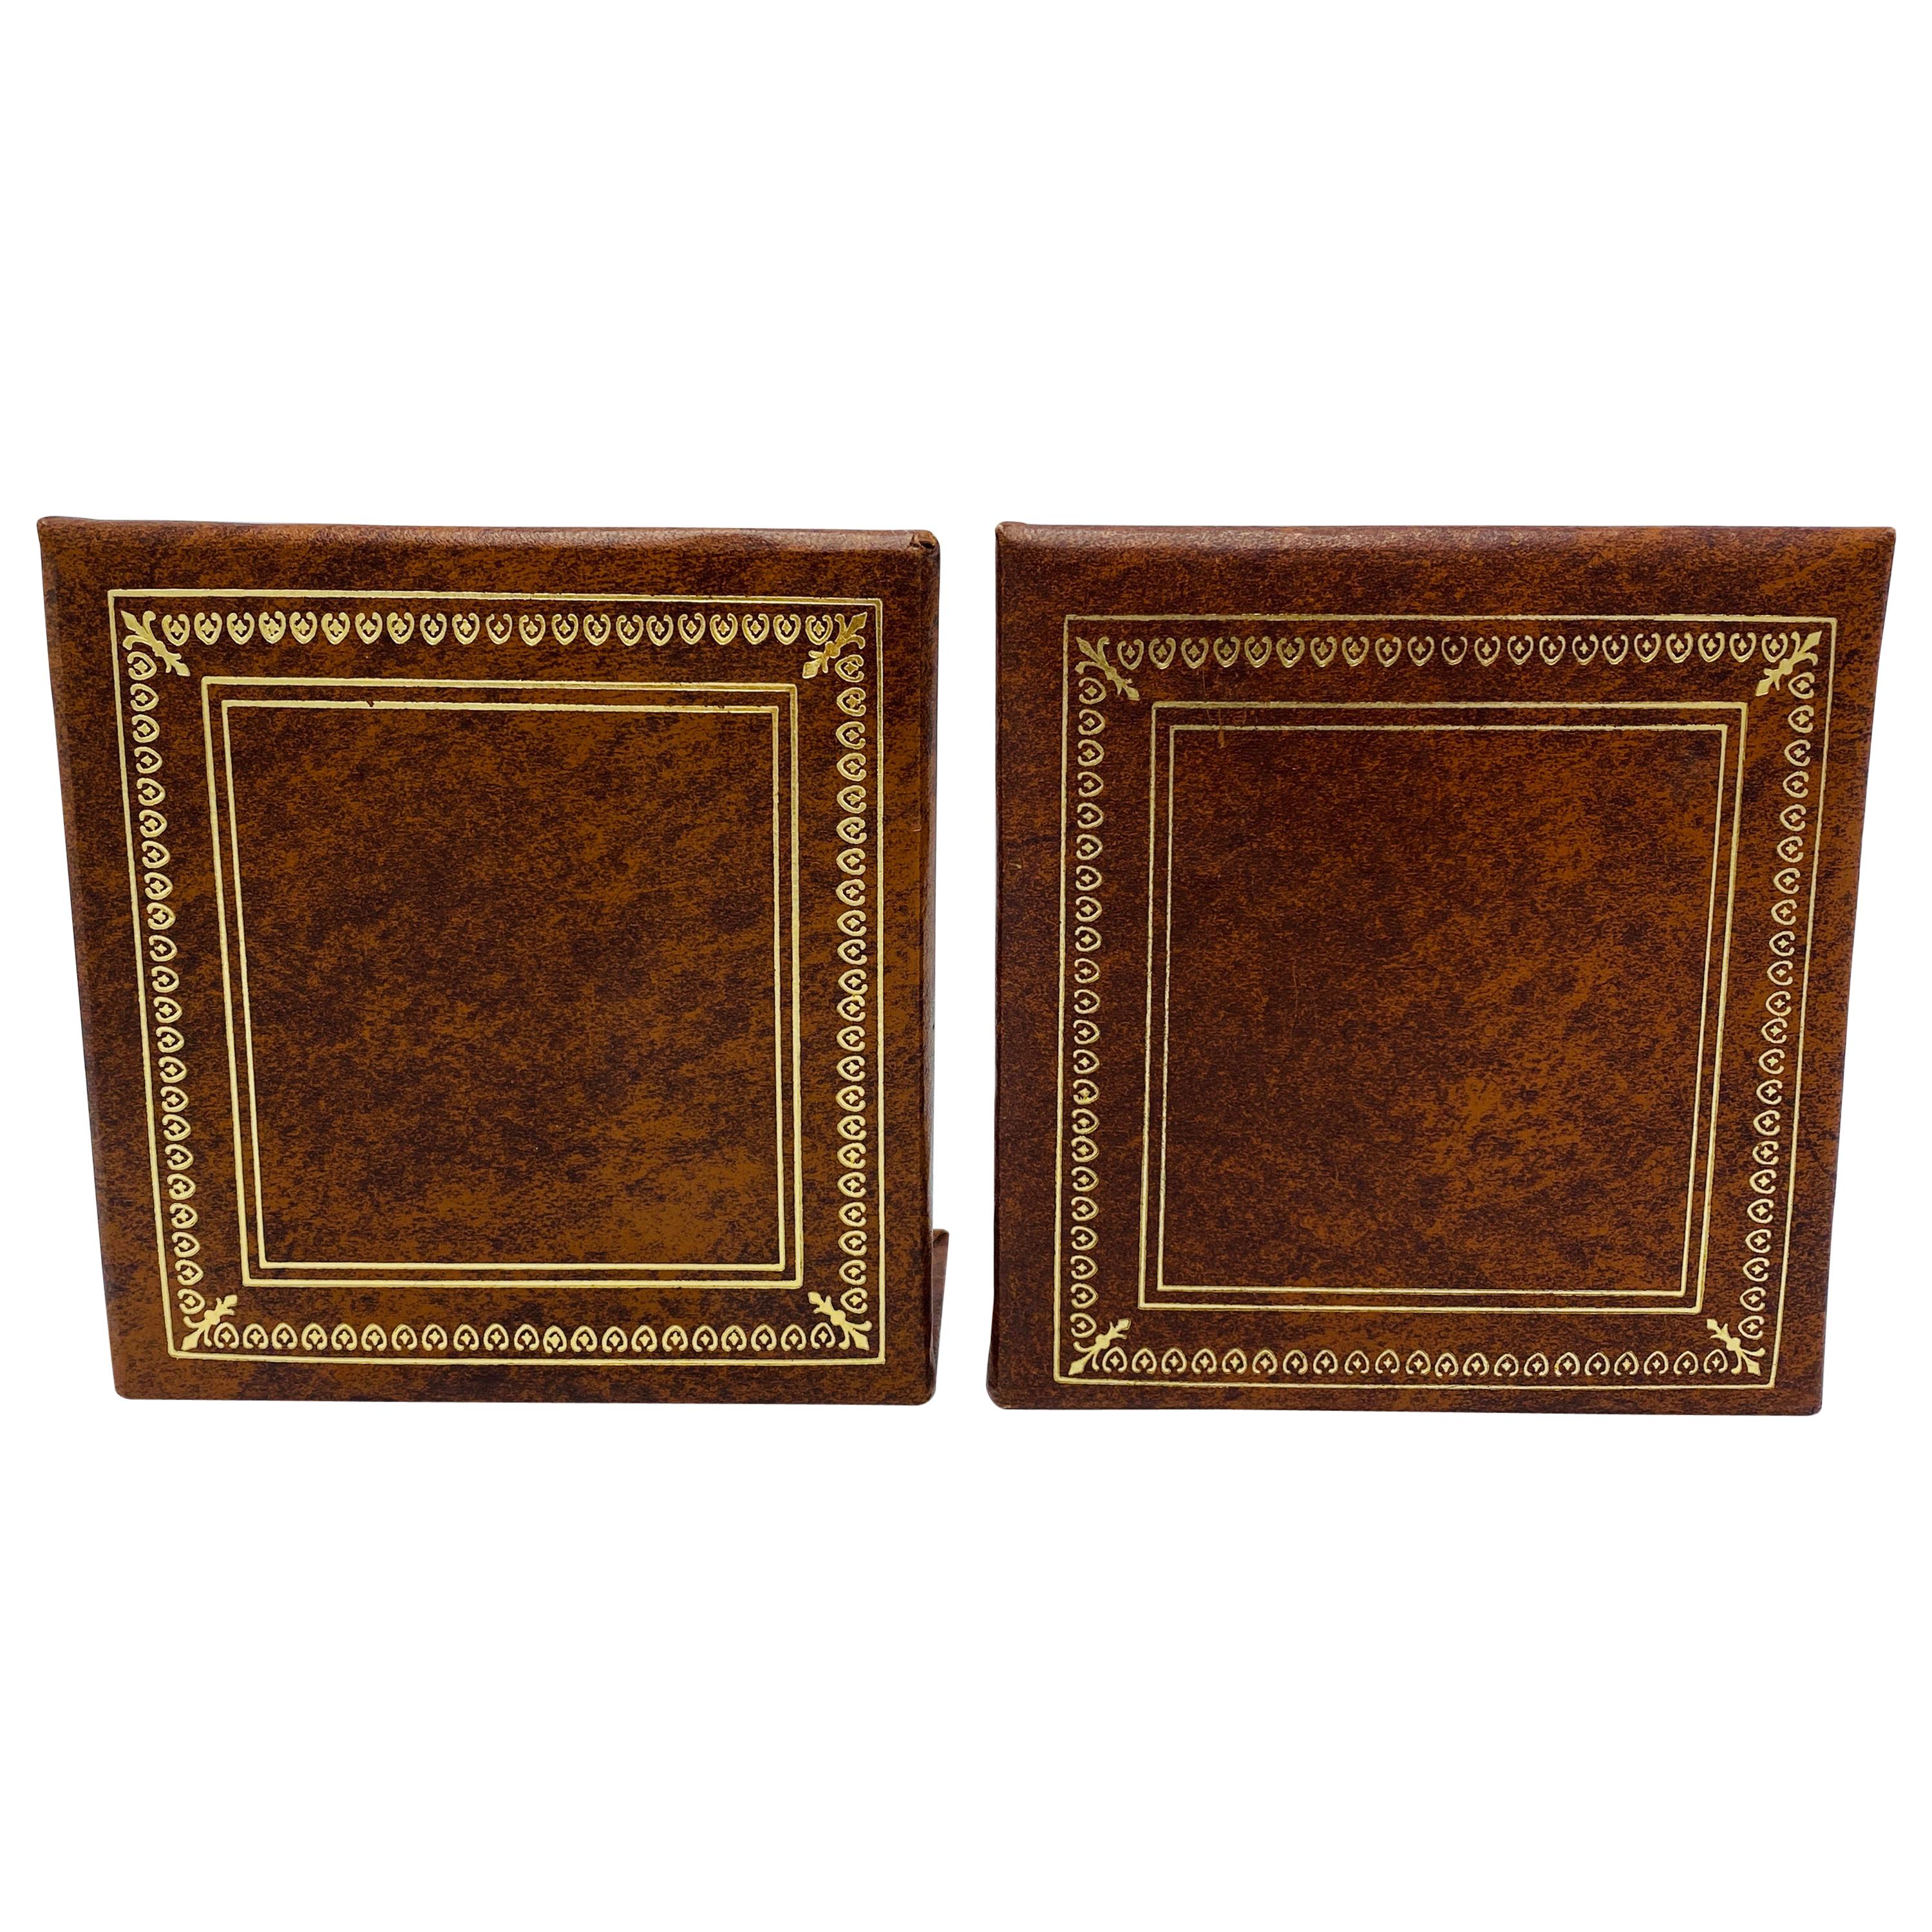 Italian Leather Bookends with Gold Debossed Border, Pair, 1960s For Sale